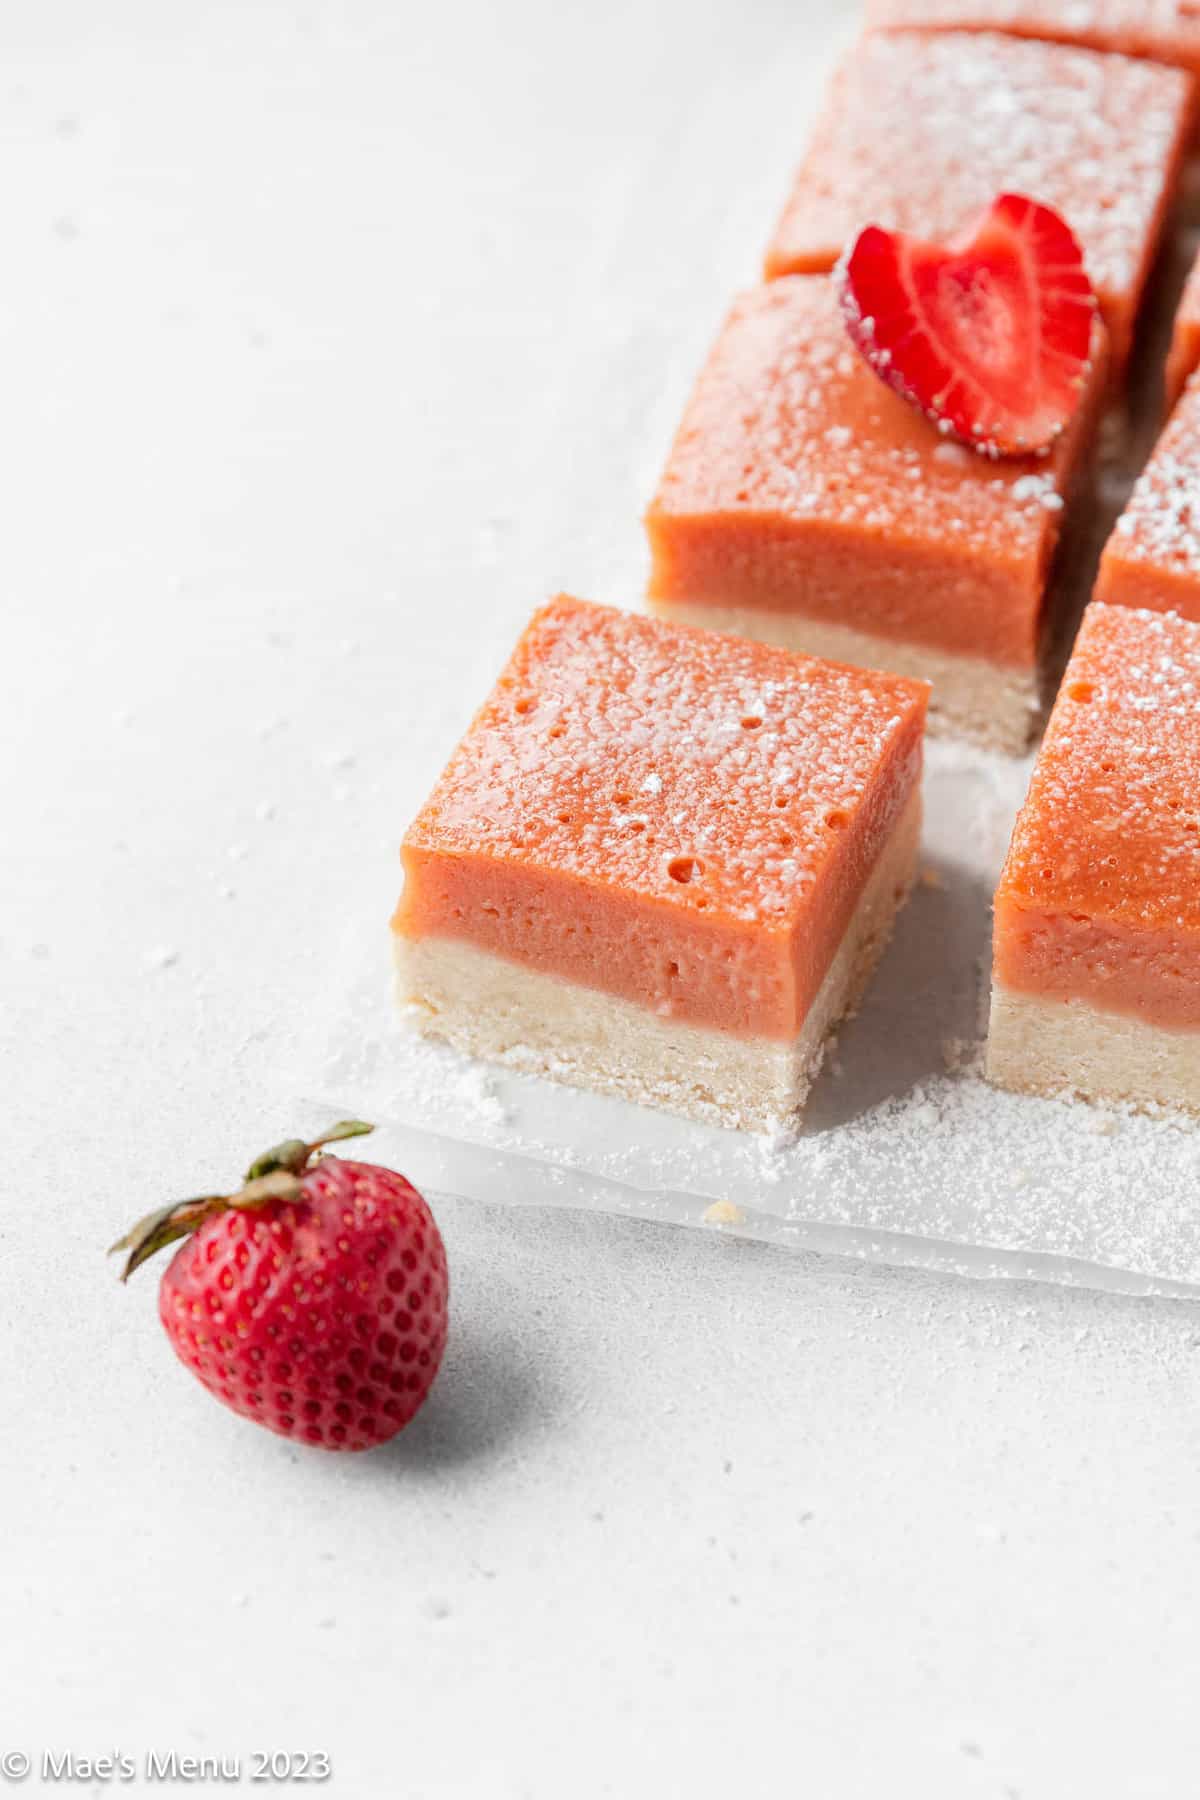 Strawberry lemonade bars on the counter with a strawberry.